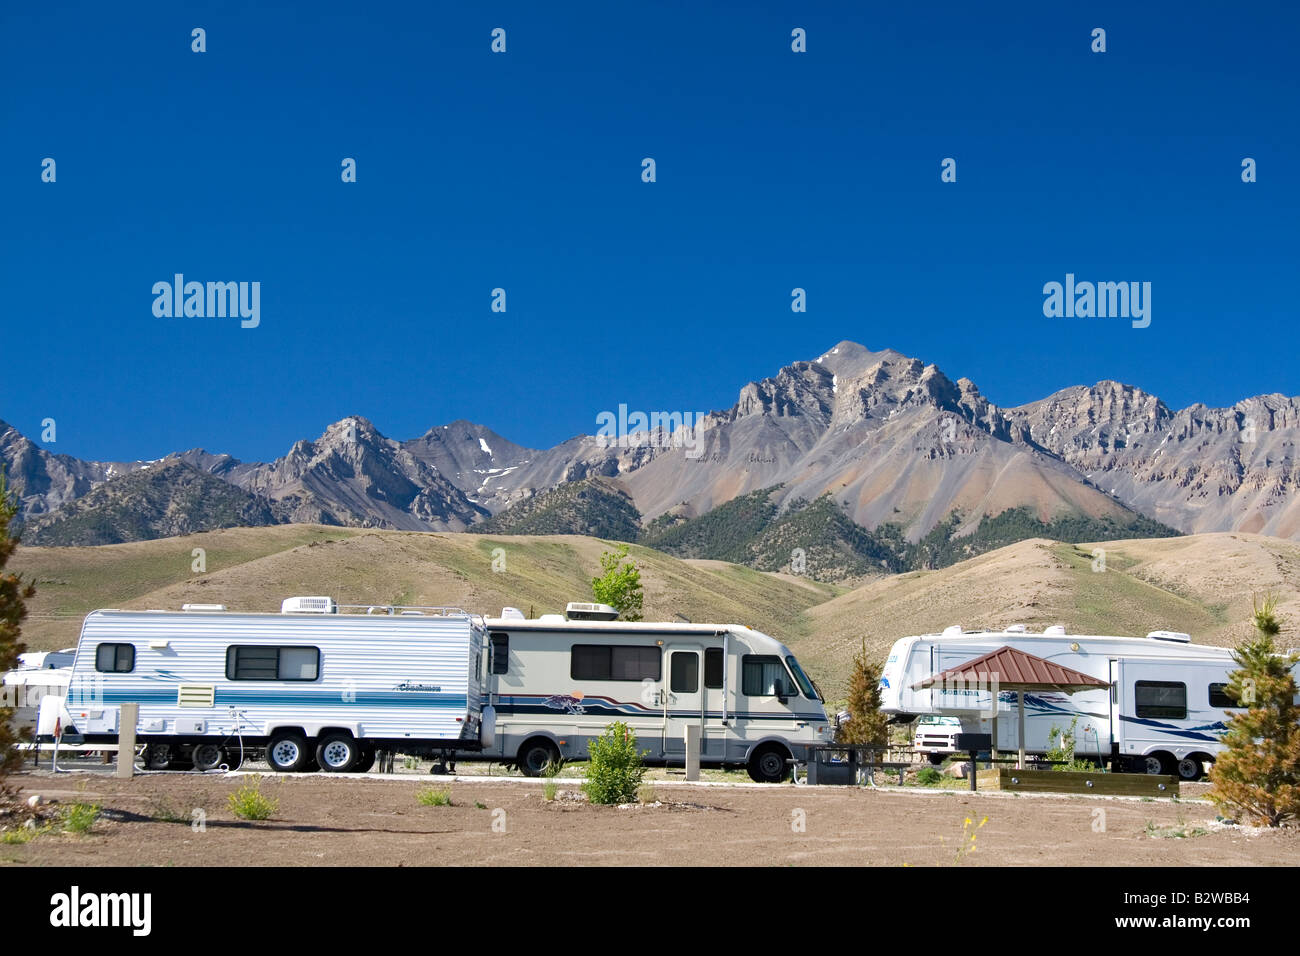 RV camping at the Joe T Fallini BLM campground below the mountain peaks of the Lost River Range in central Idaho Stock Photo